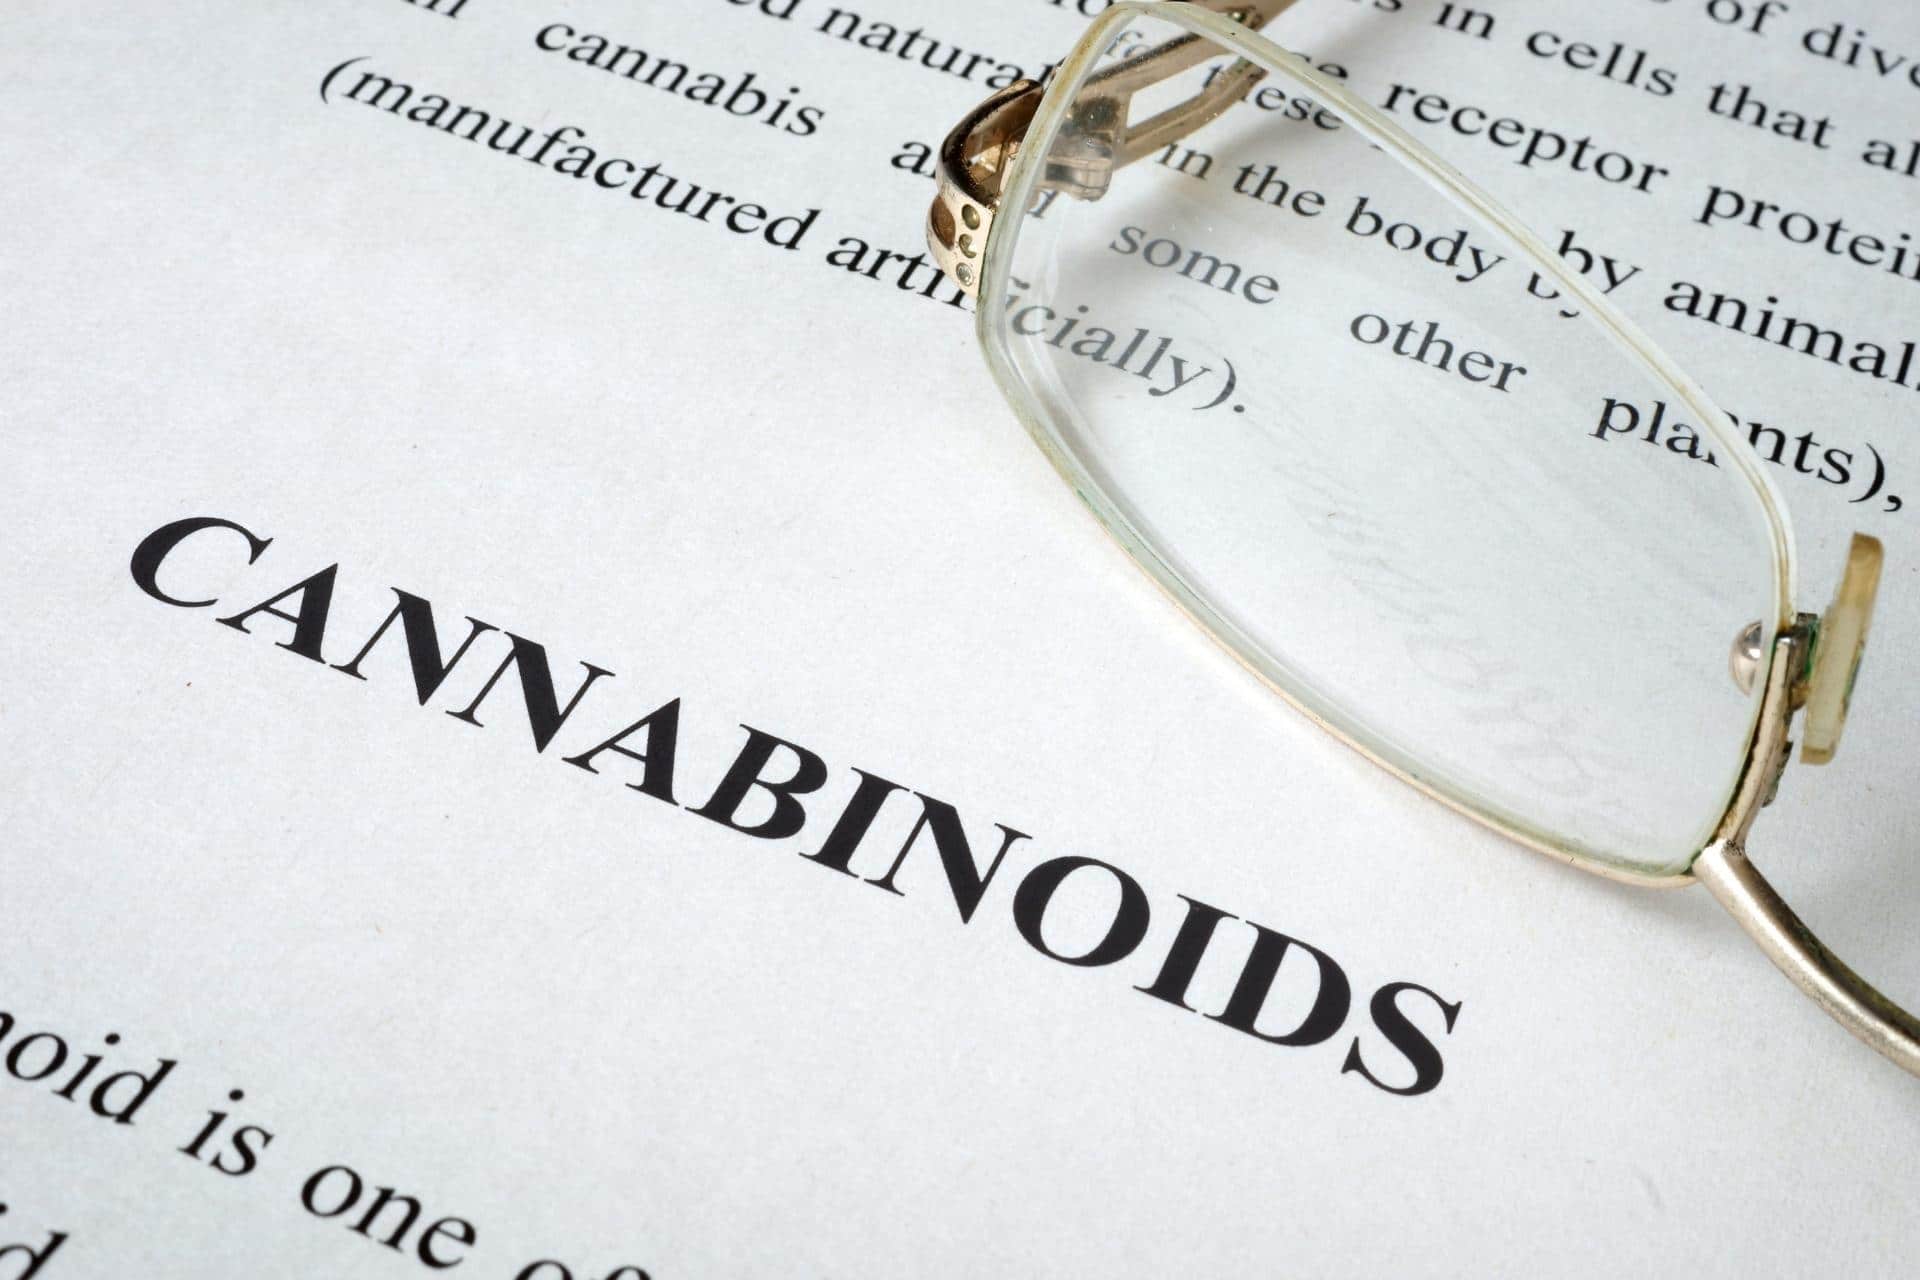 Close-up of word “cannabinoids” in a research journal